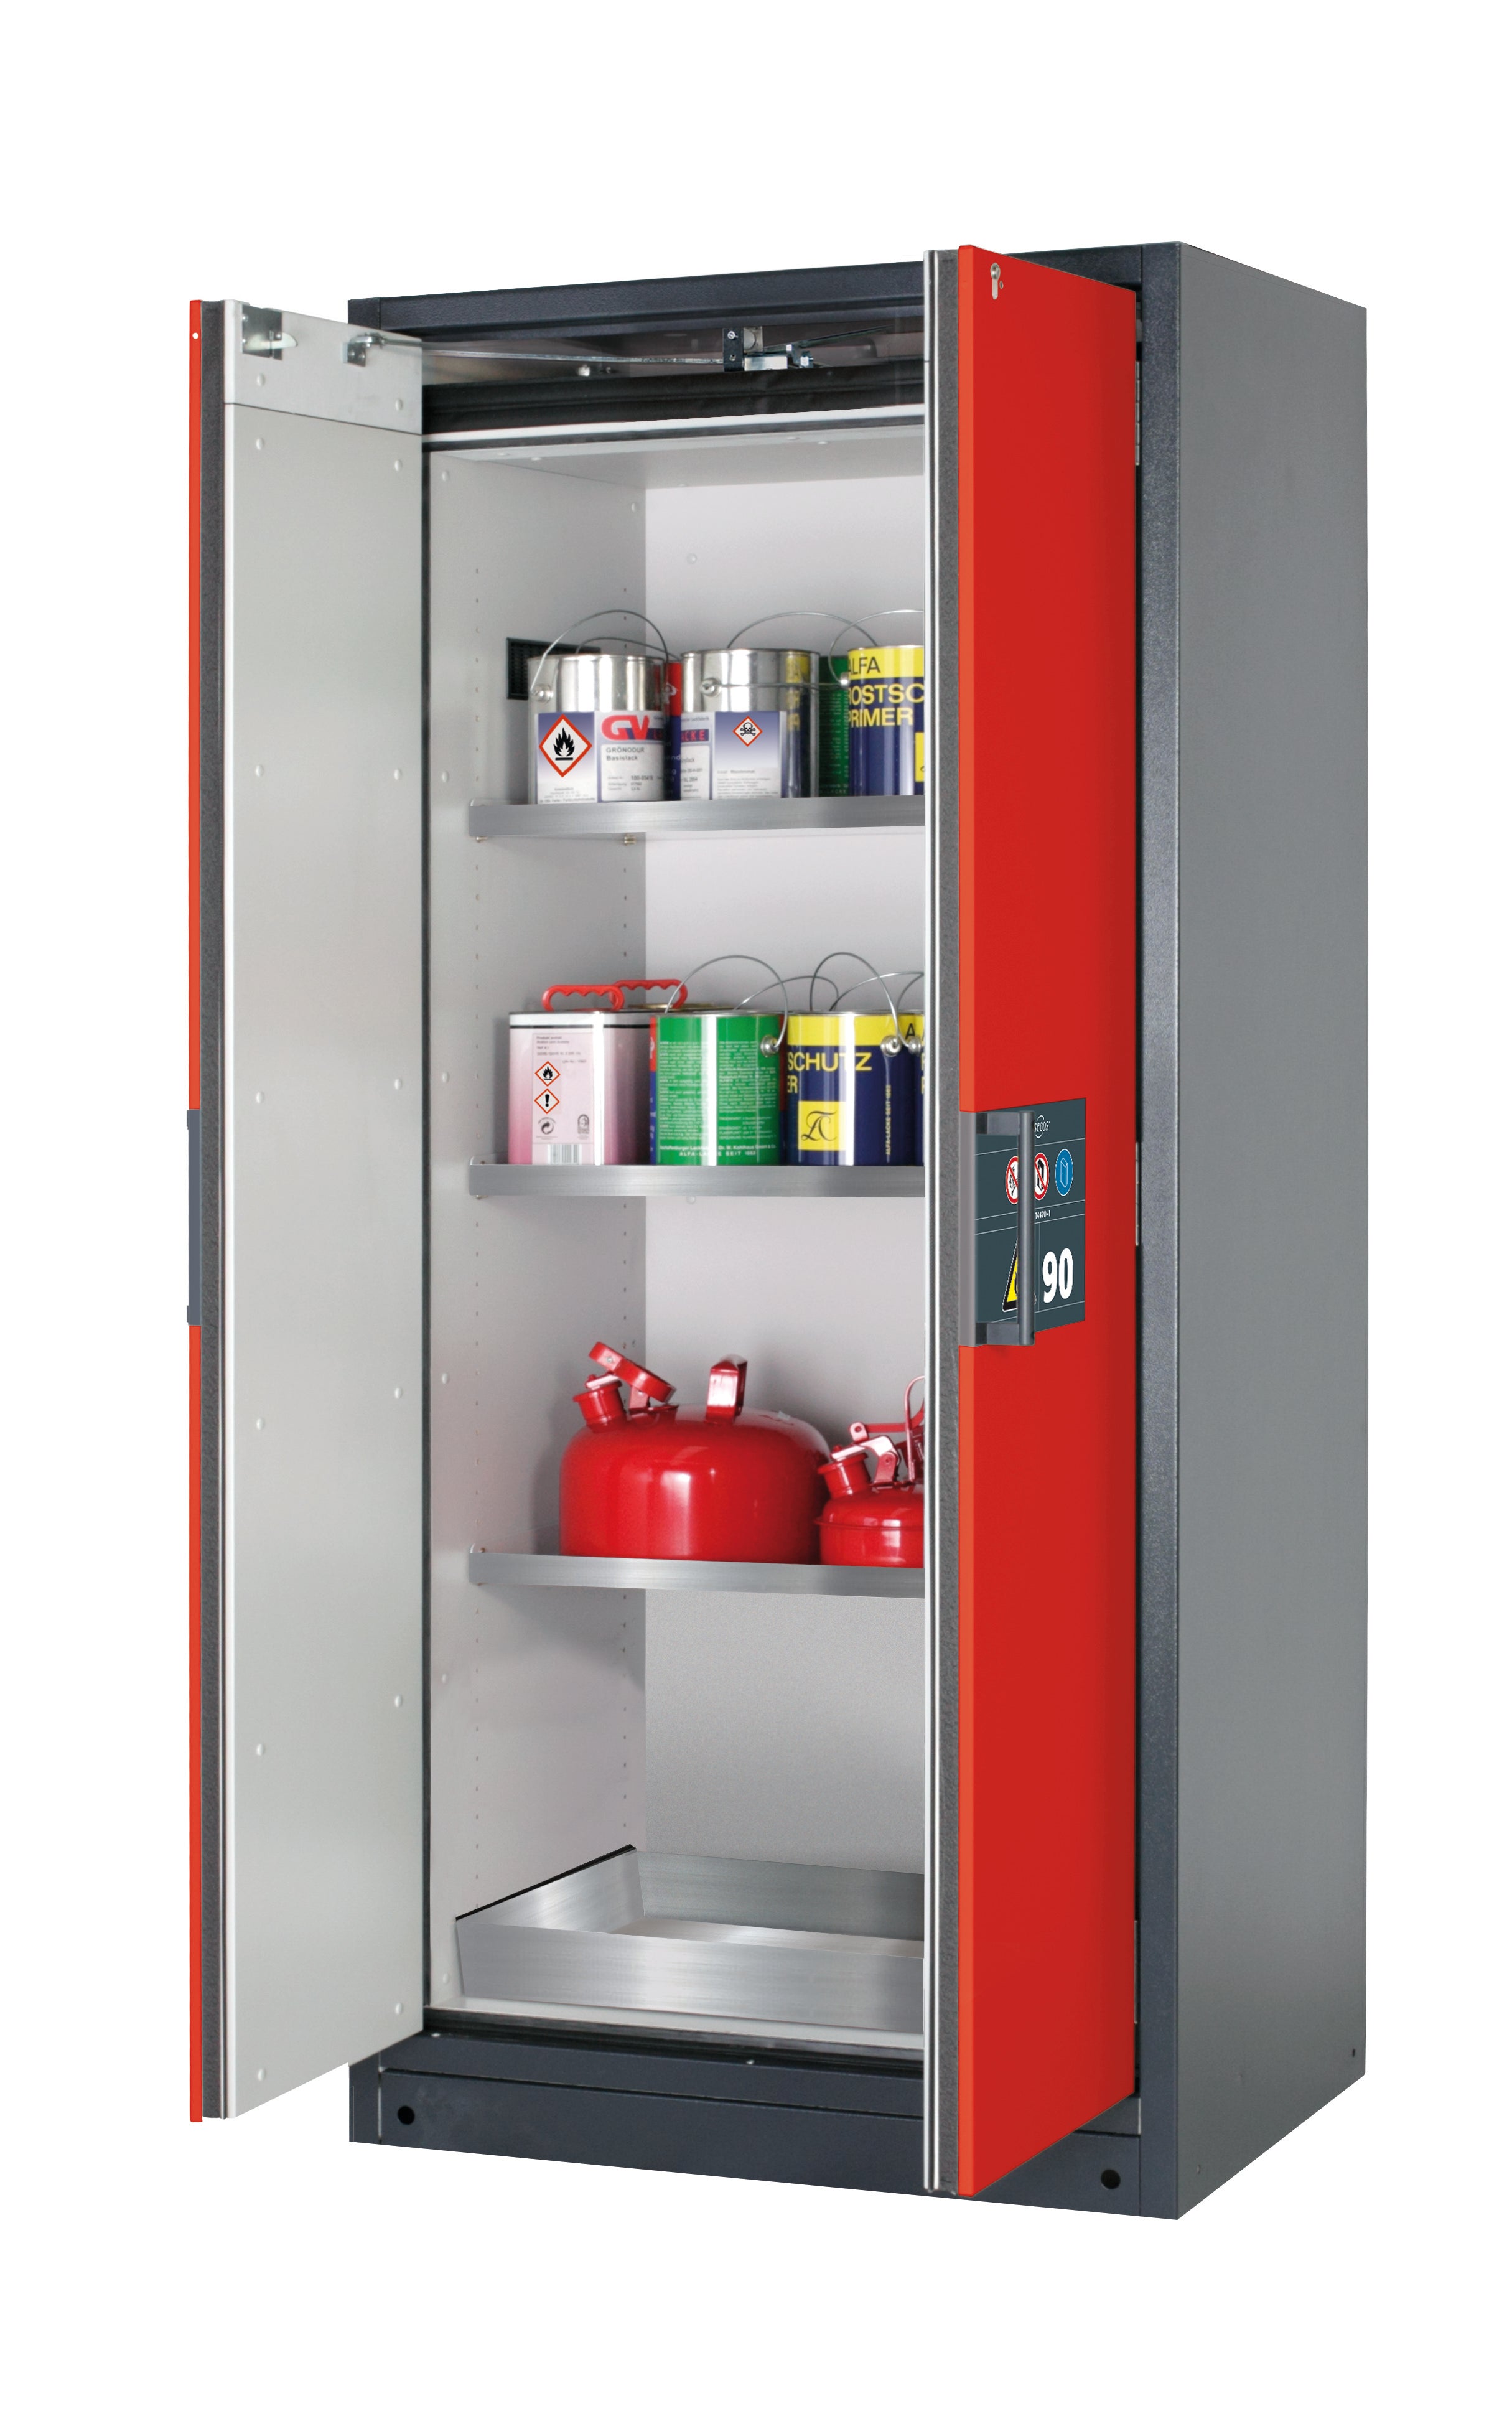 Type 90 safety storage cabinet Q-PEGASUS-90 model Q90.195.090.WDAC in traffic red RAL 3020 with 3x shelf standard (stainless steel 1.4301),